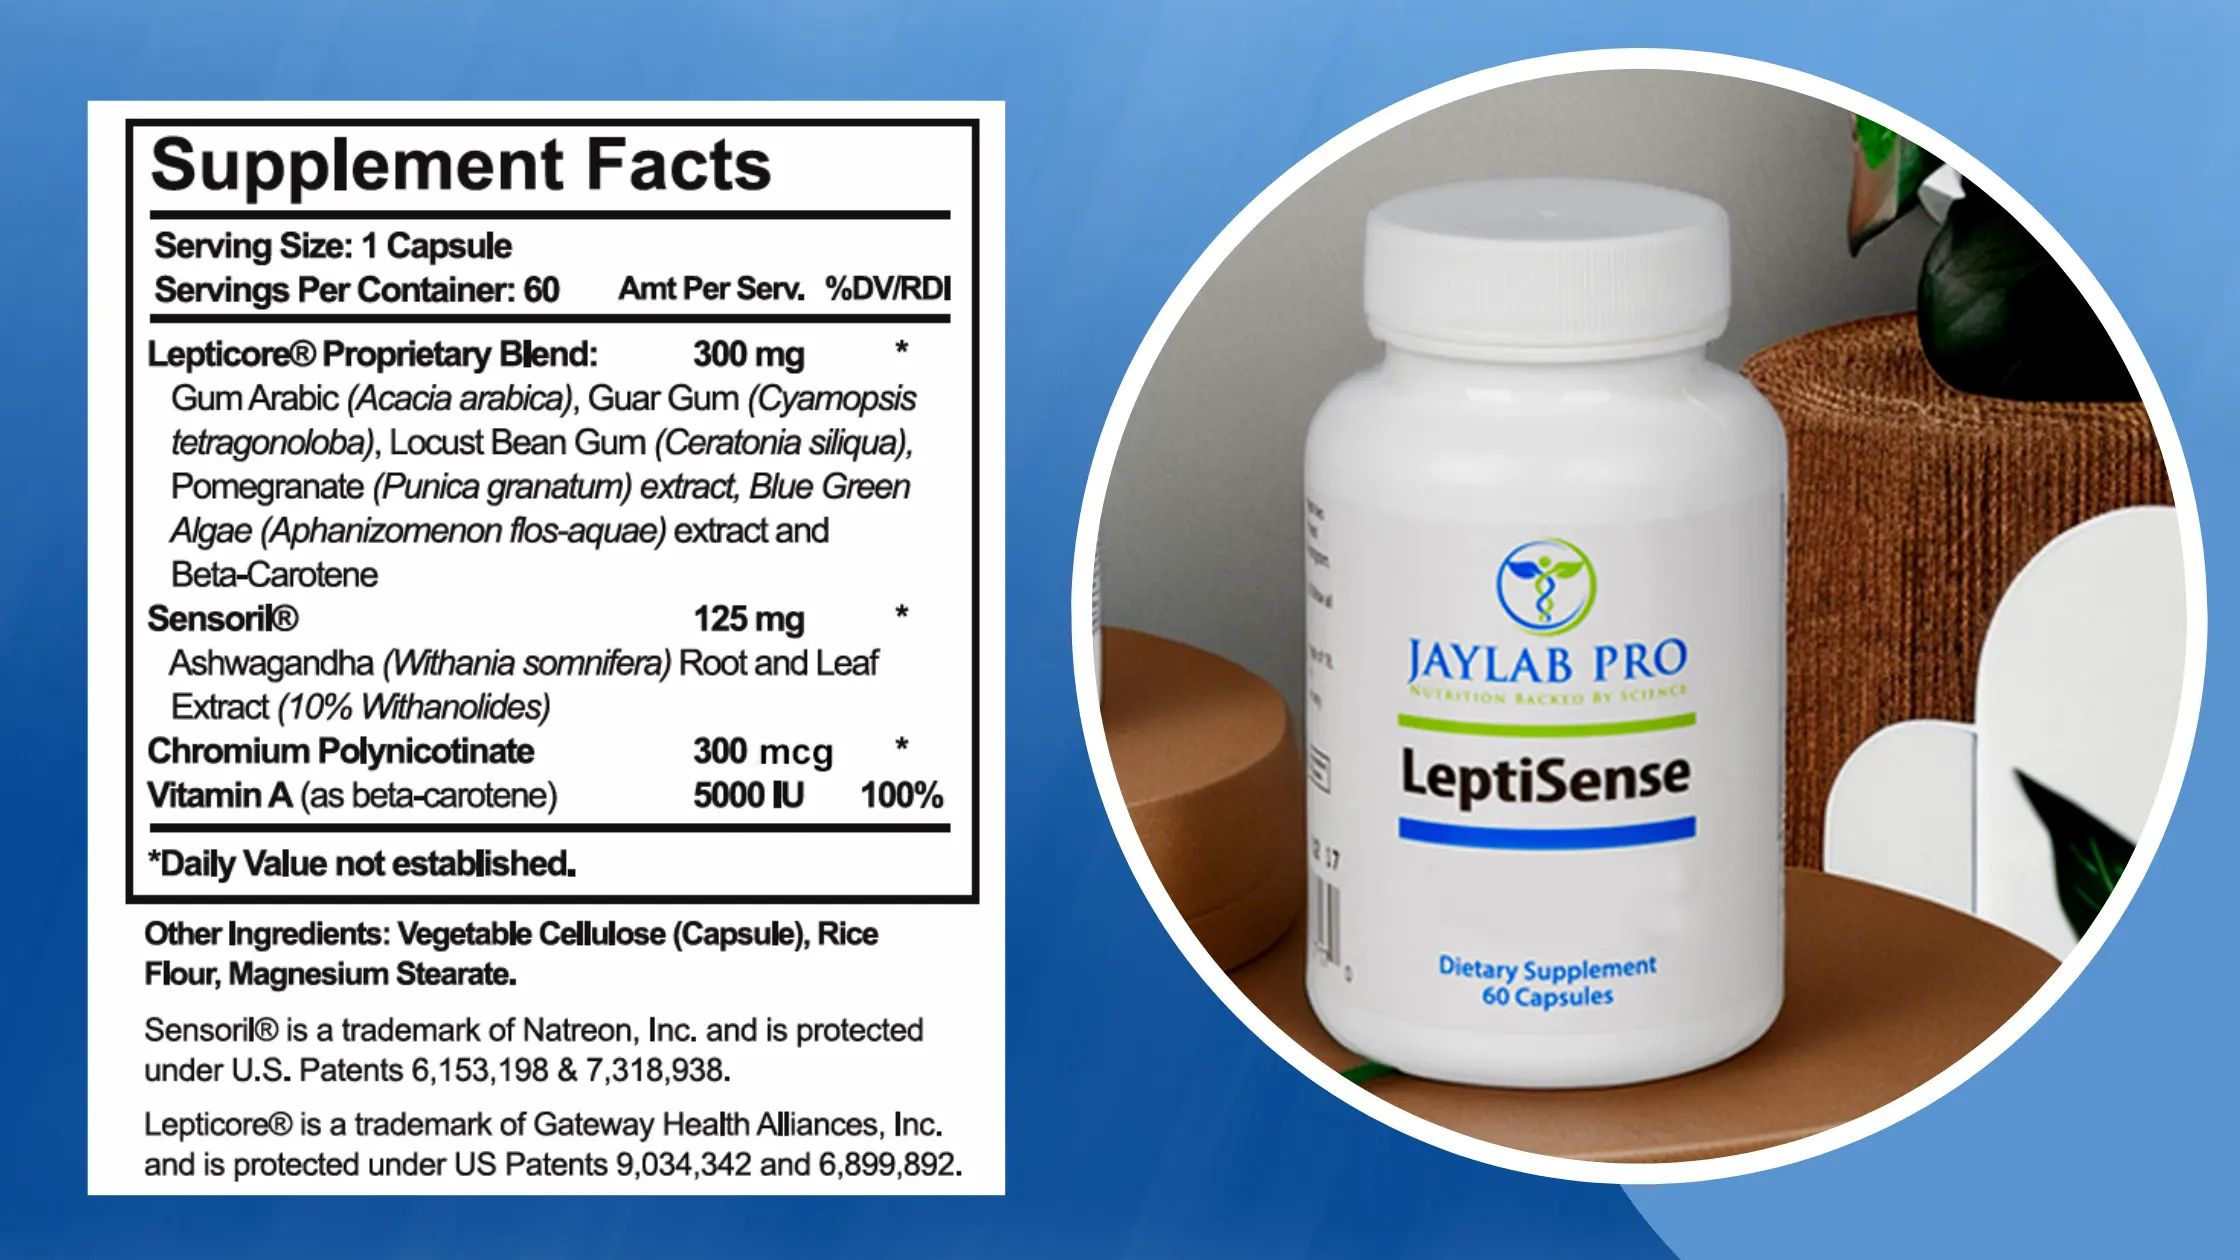 LeptiSense supplement facts